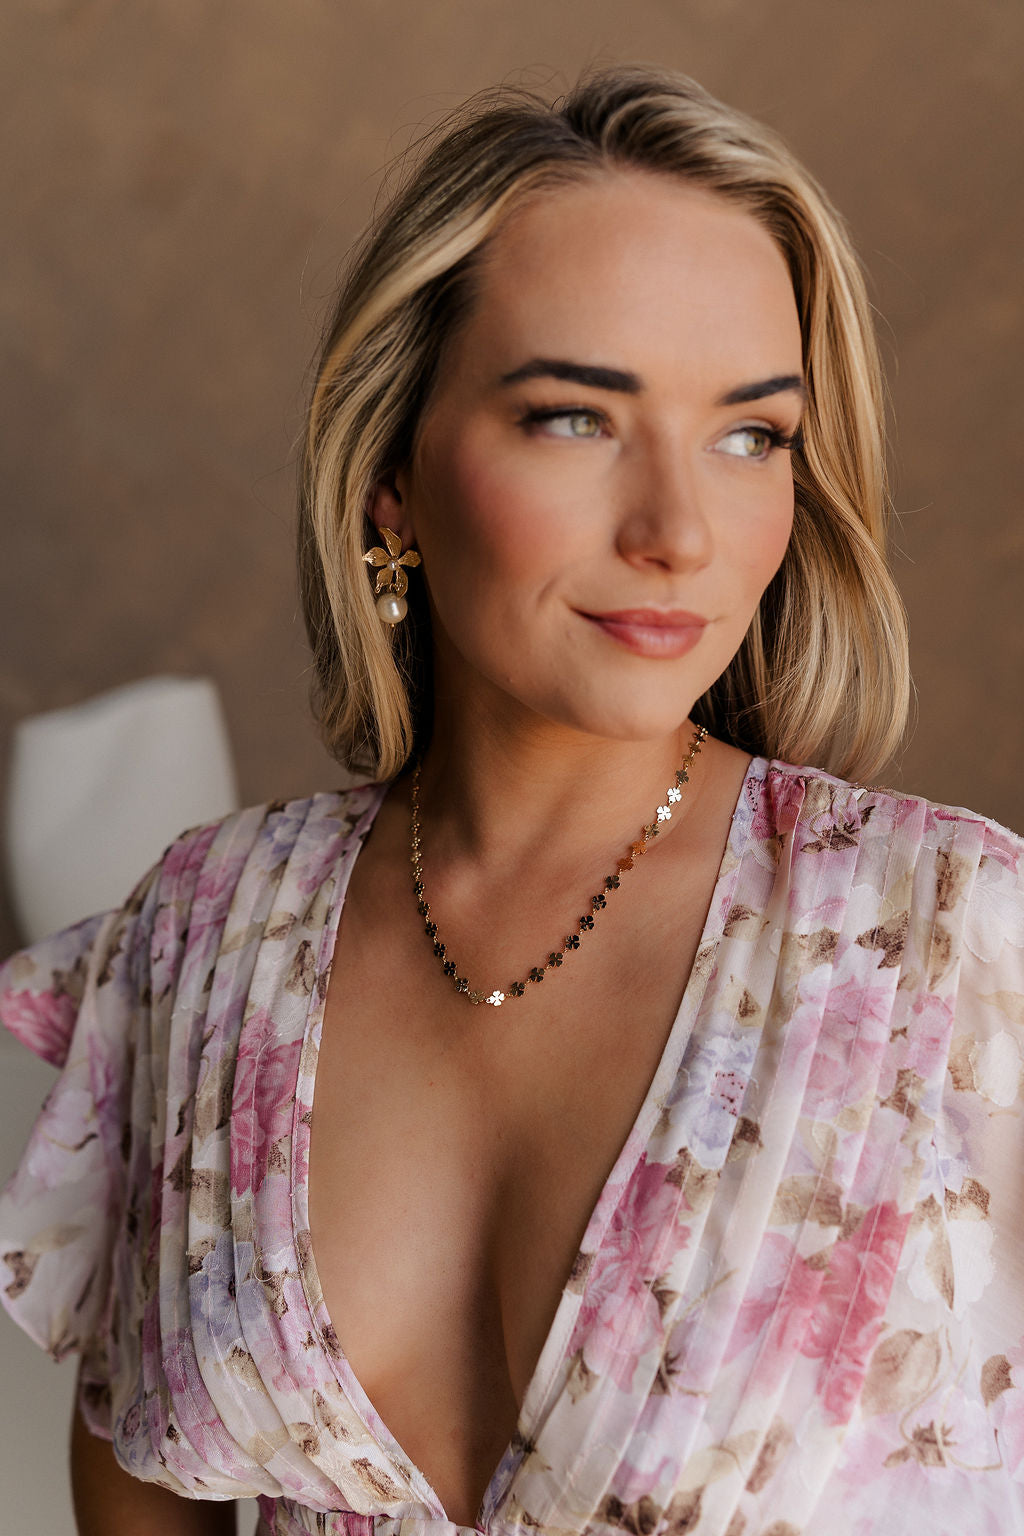 Clos eup view of female model wearing the Mina Gold Floral & Pearl Dangle Earring which features gold flower shaped stud linked with a pearl dangle medallion